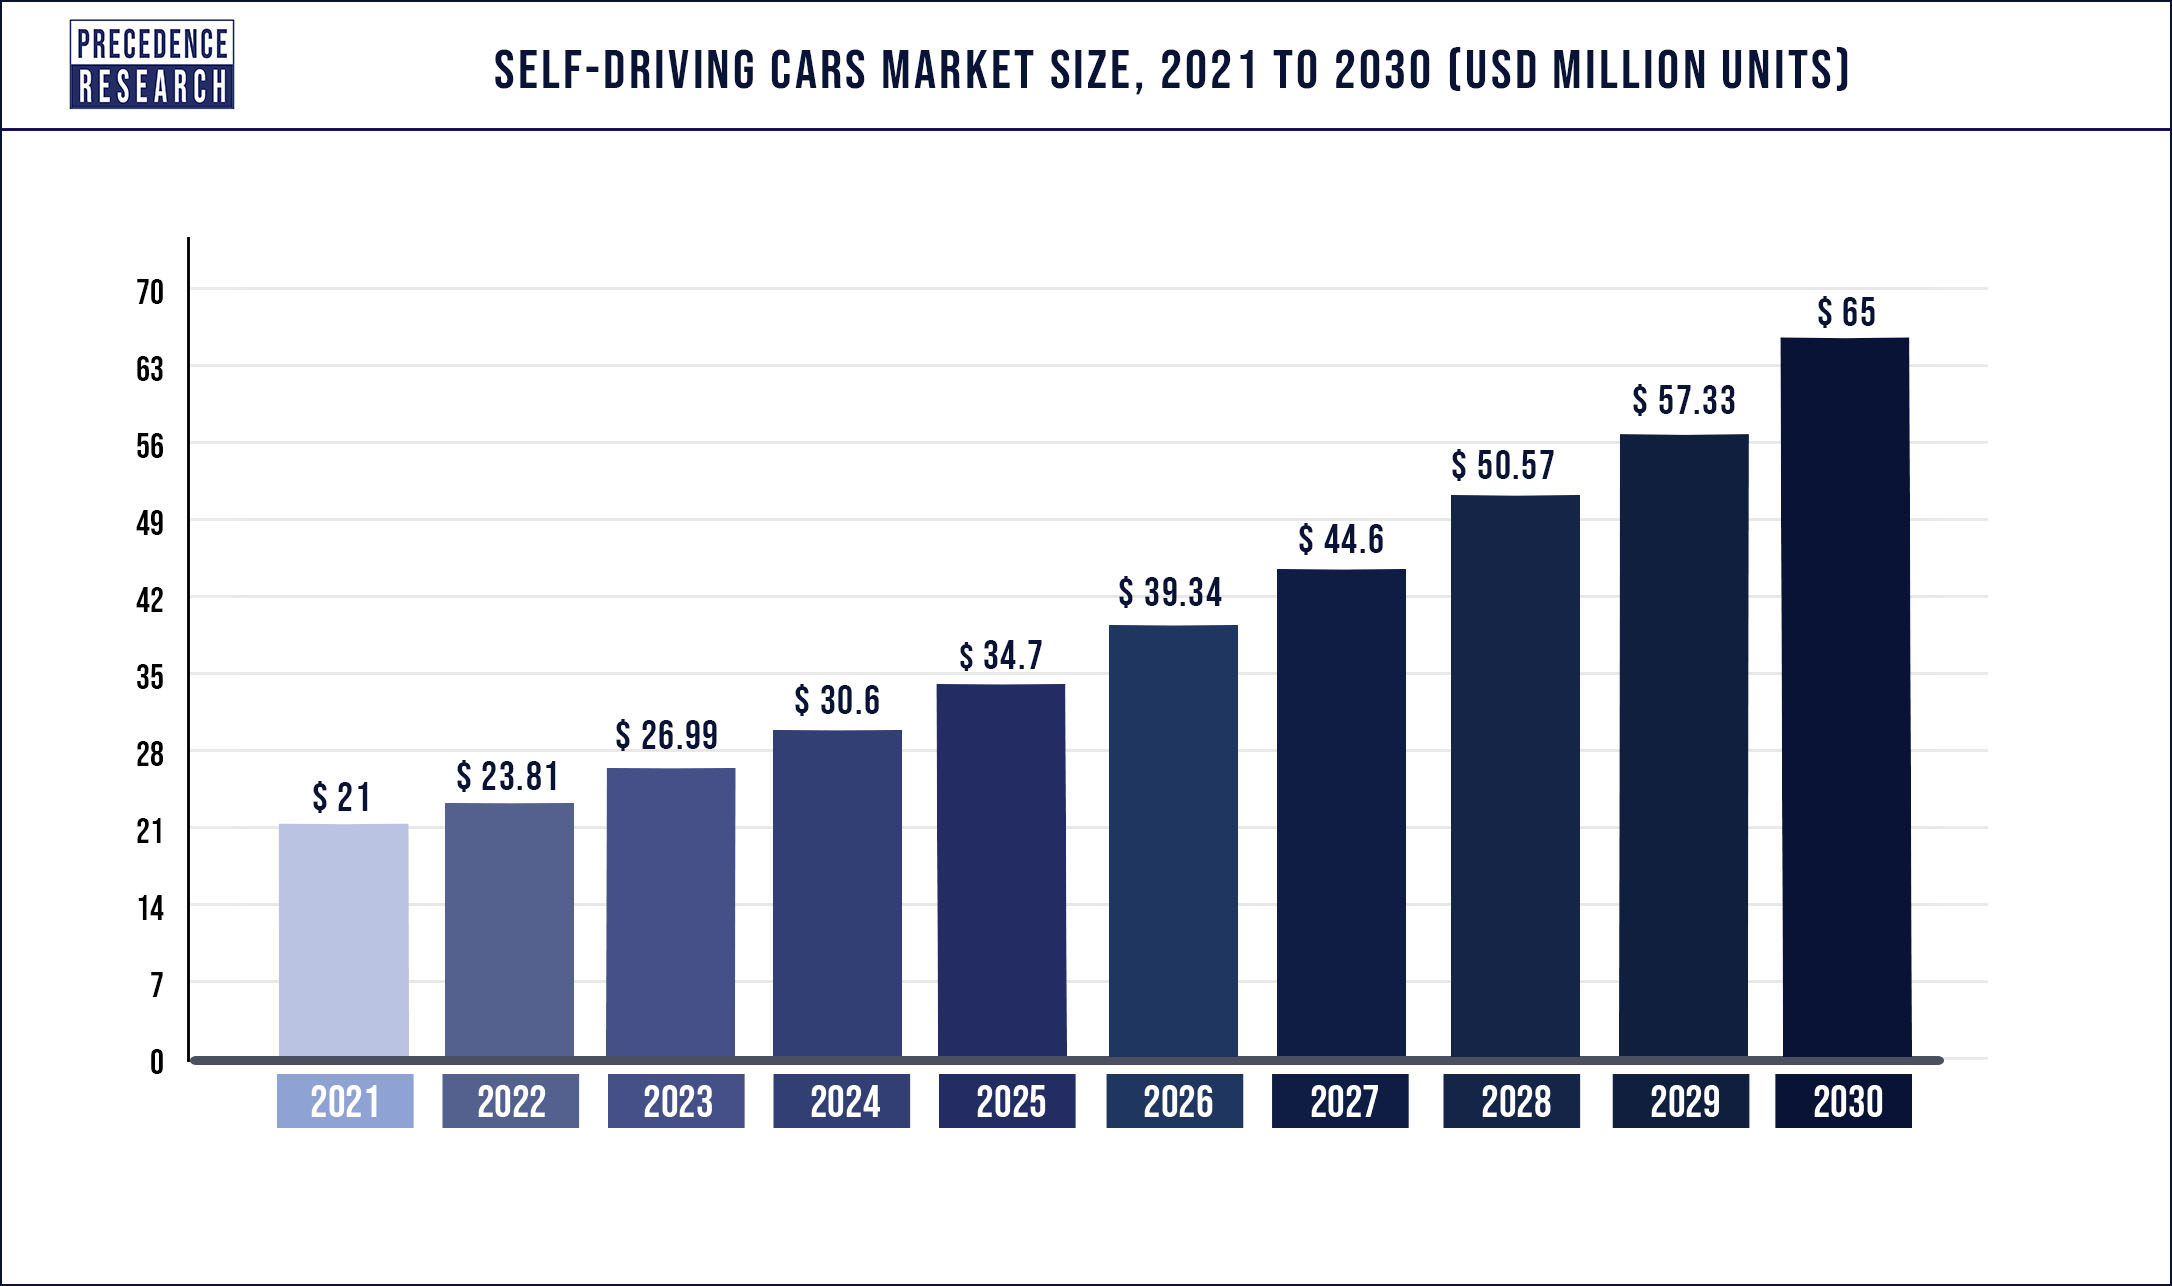 Self-Driving Cars Market Size to Exceed US$ 65 million by 2030 | Says Precedence Research